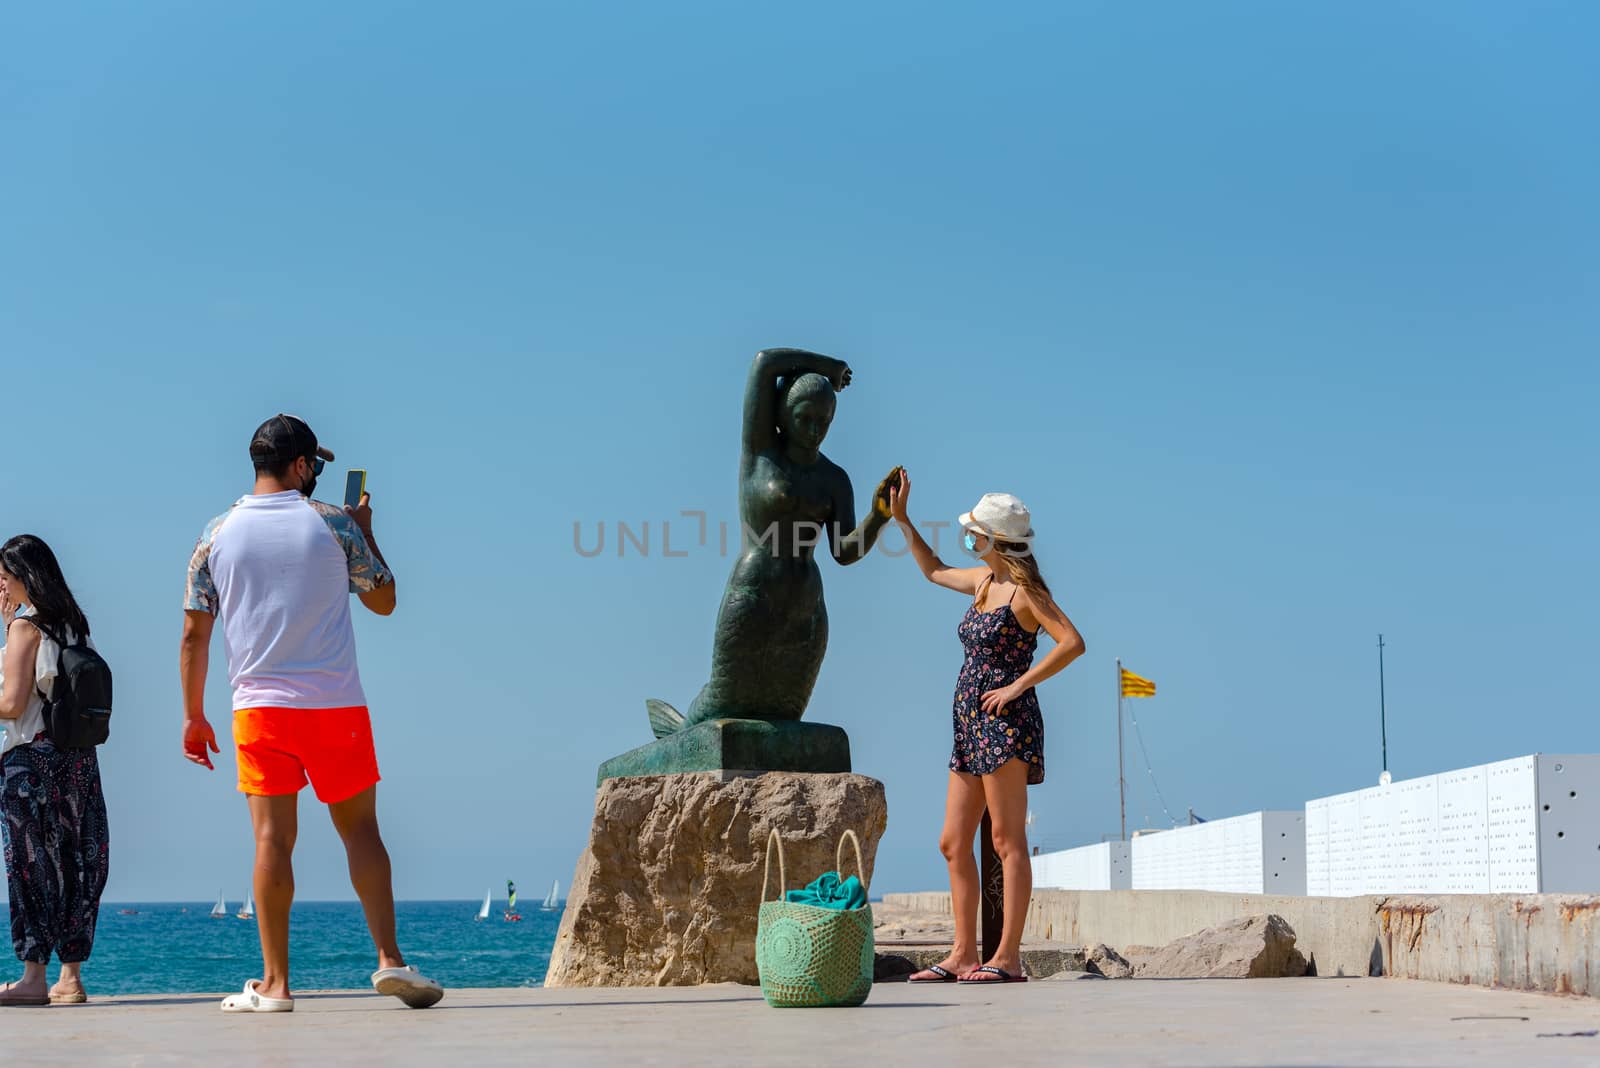 Sitges, Catalonia, Spain: July 28, 2020: Tourist take picture on the beach in Sitges in summer 2020.